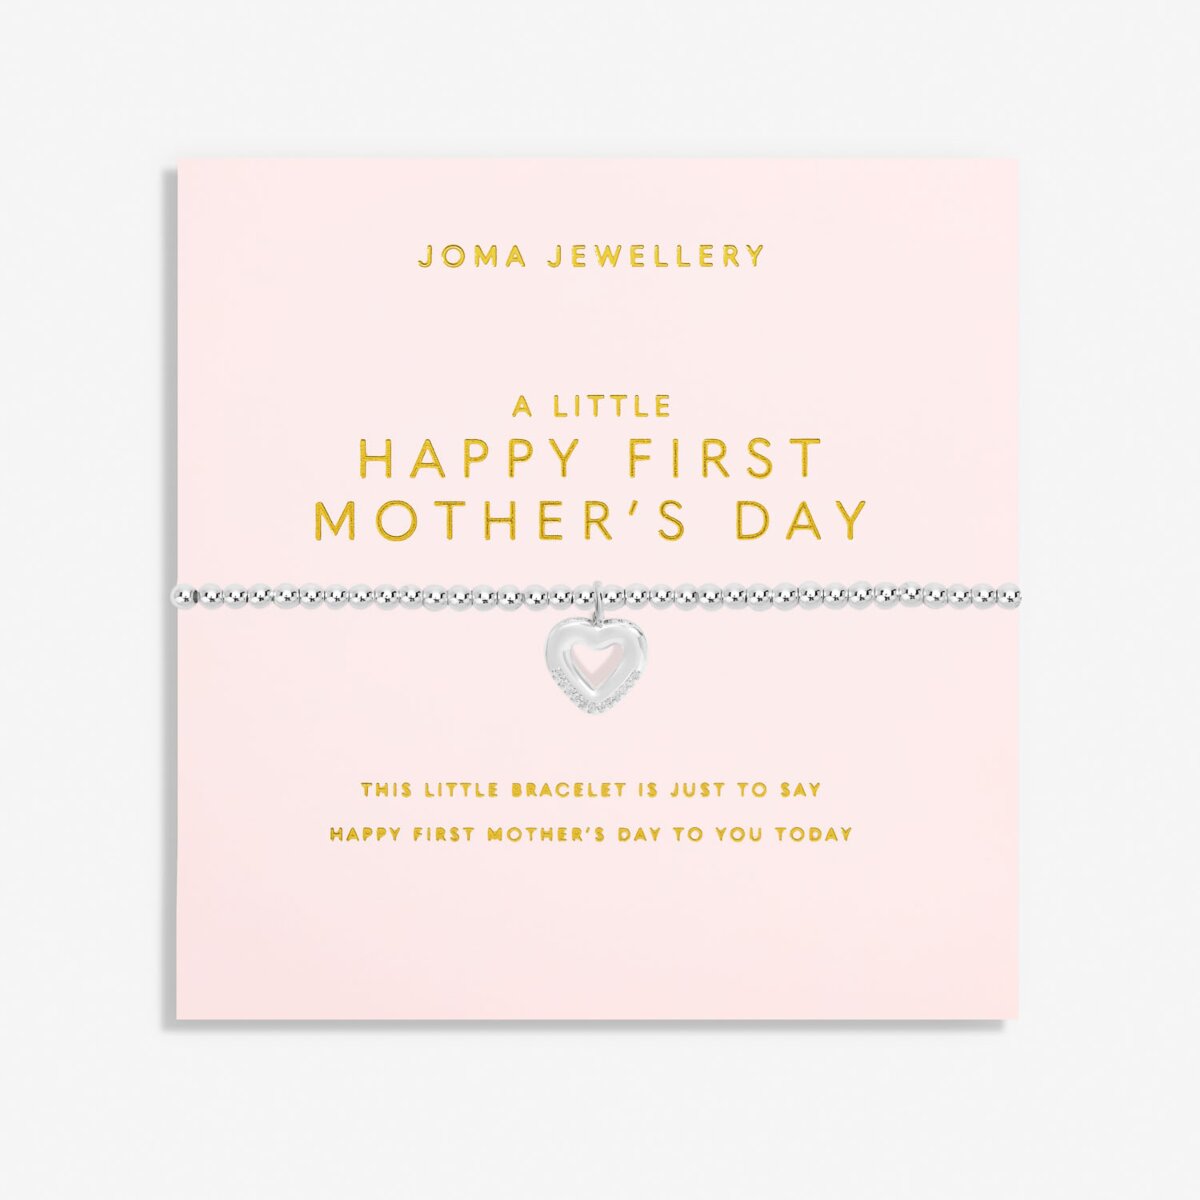 JOMA JEWELLERY | MOTHER'S DAY A LITTLE | HAPPY FIRST MOTHER'S DAY BRACELET